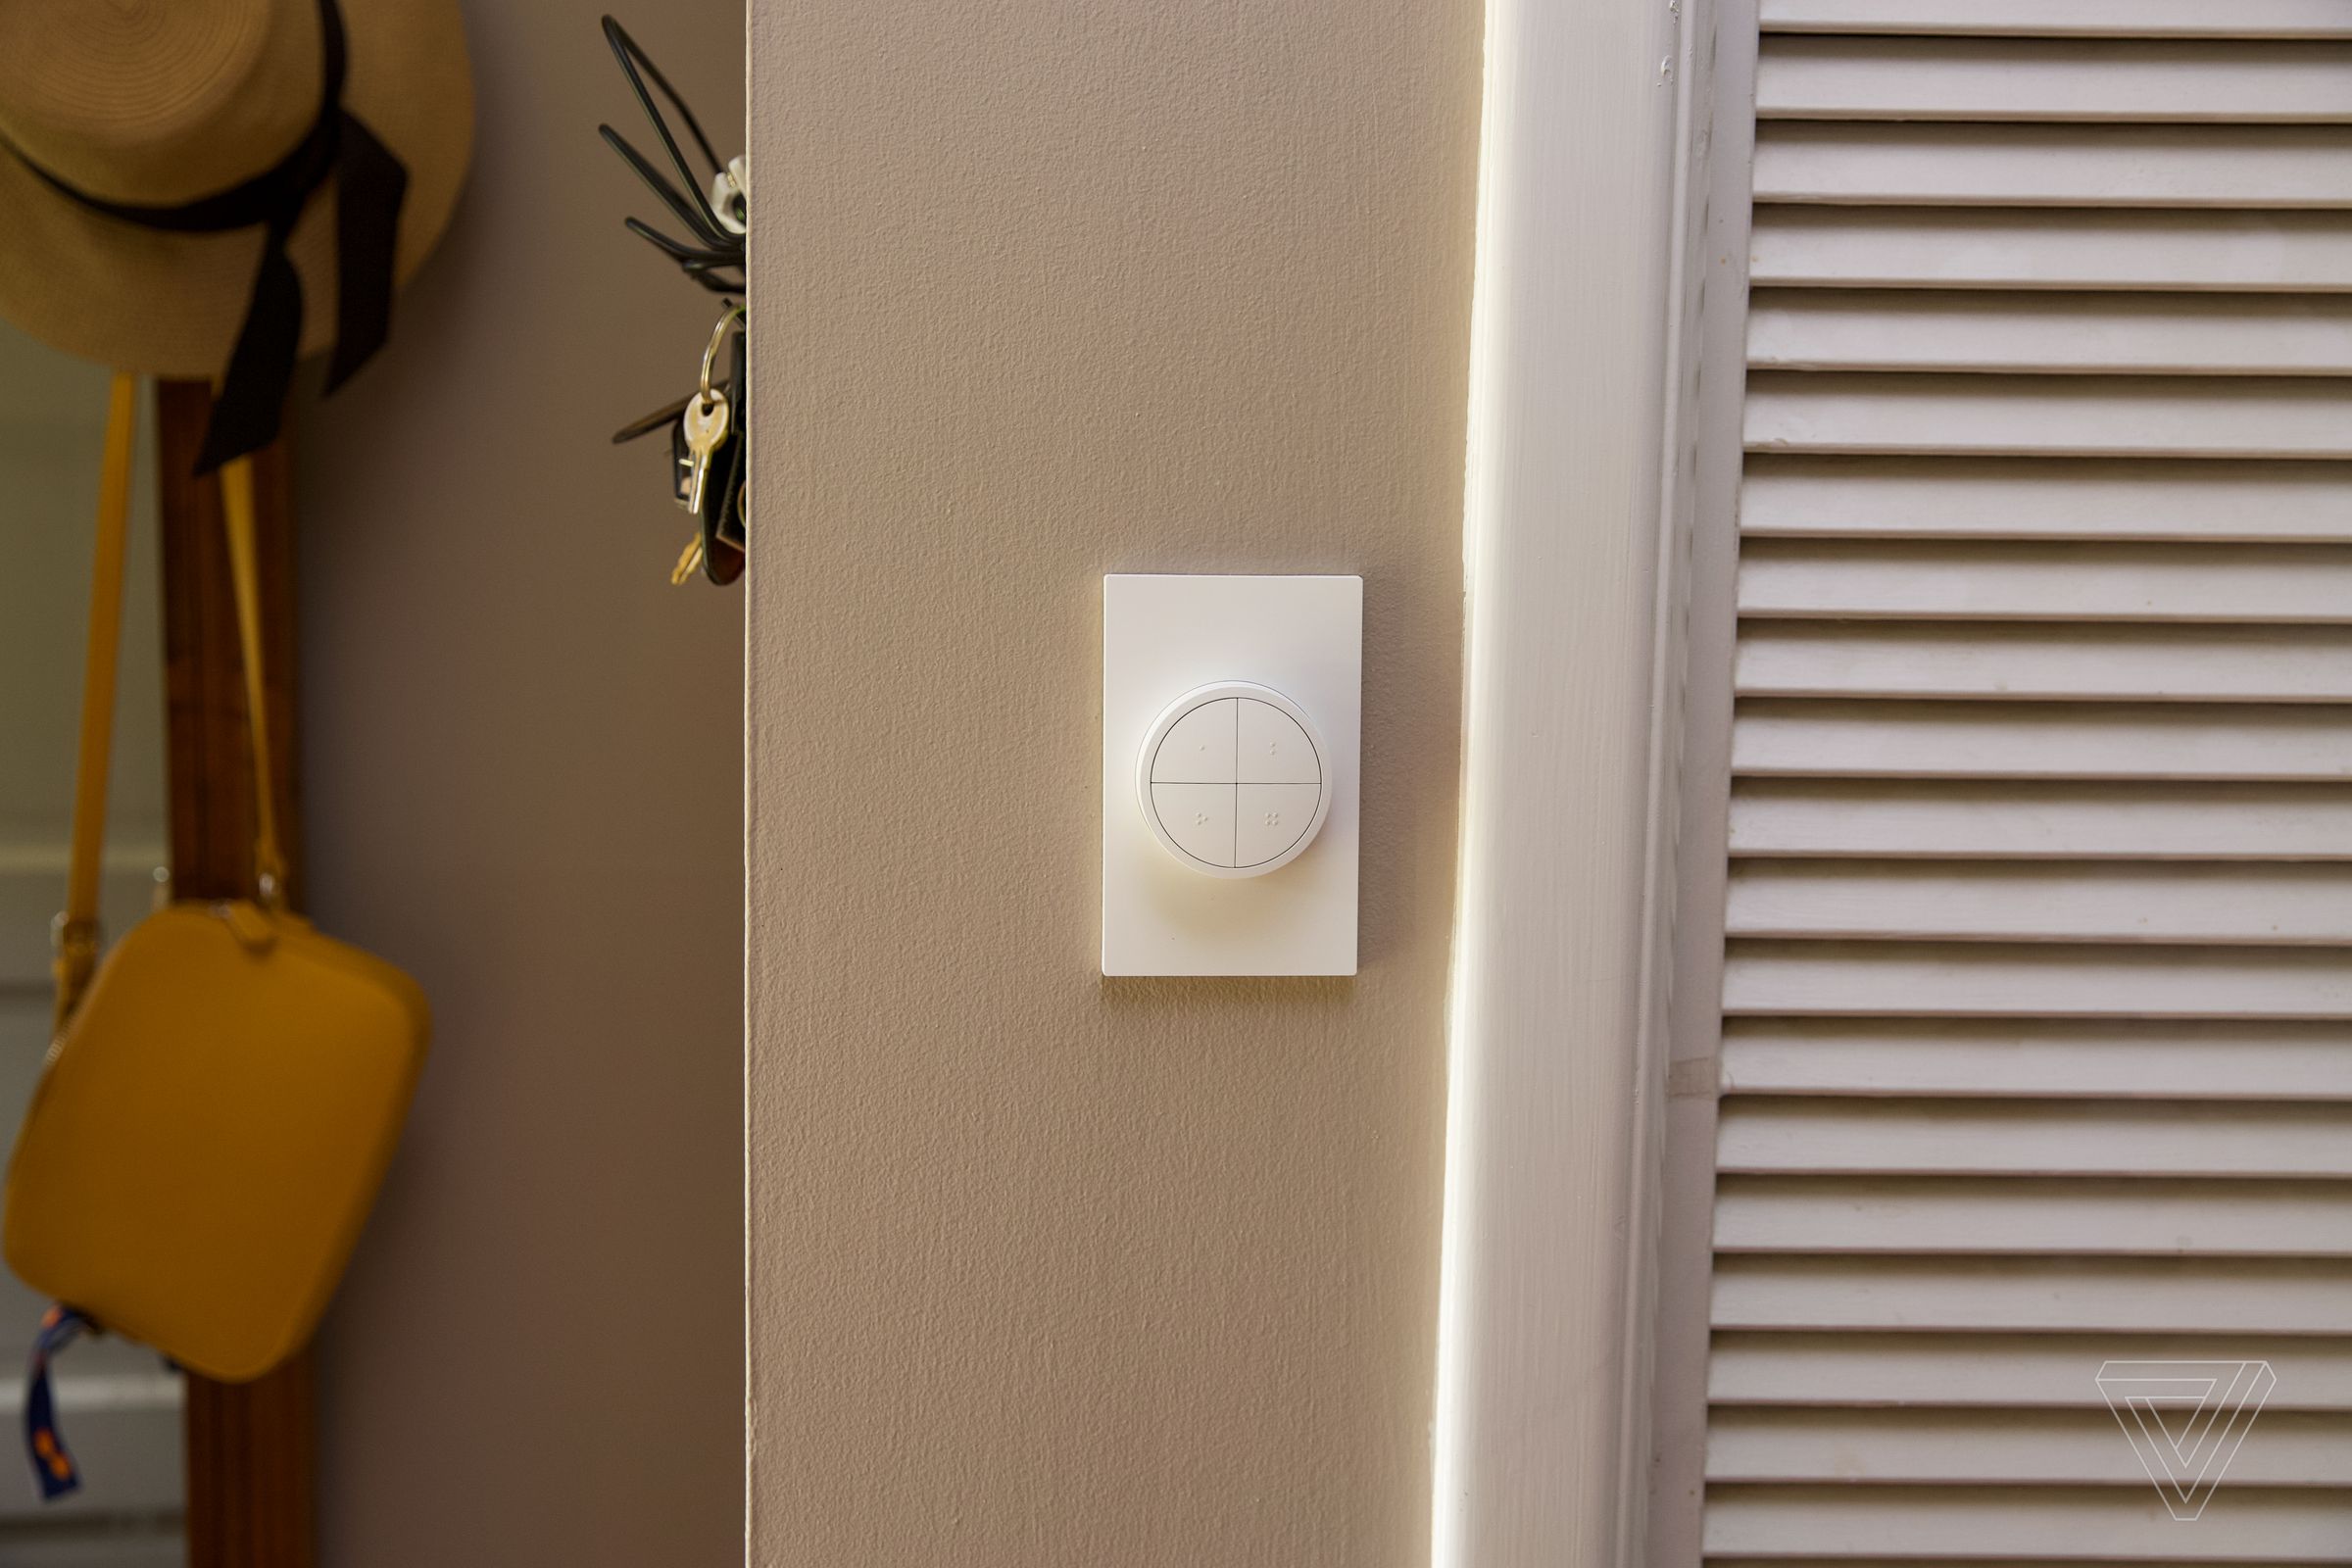 The Hue Tap Dial Switch is one of the Hue accessories you need the Hue app in order to program and set up.